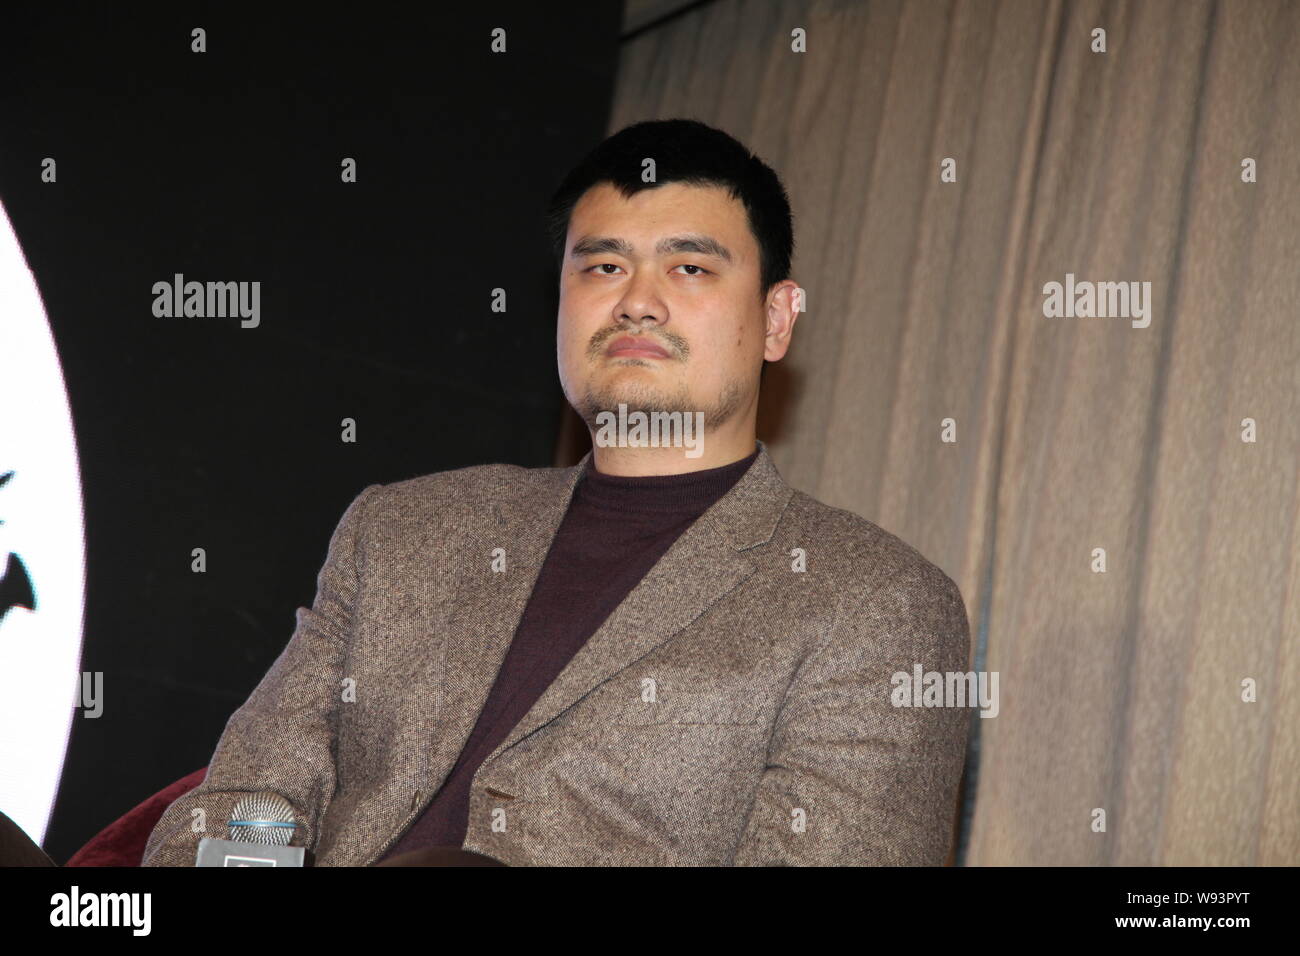 Former NBA basketball player Yao Ming is pictured during a press conference for the global release of a noncommercial film aiming to protect and save Stock Photo